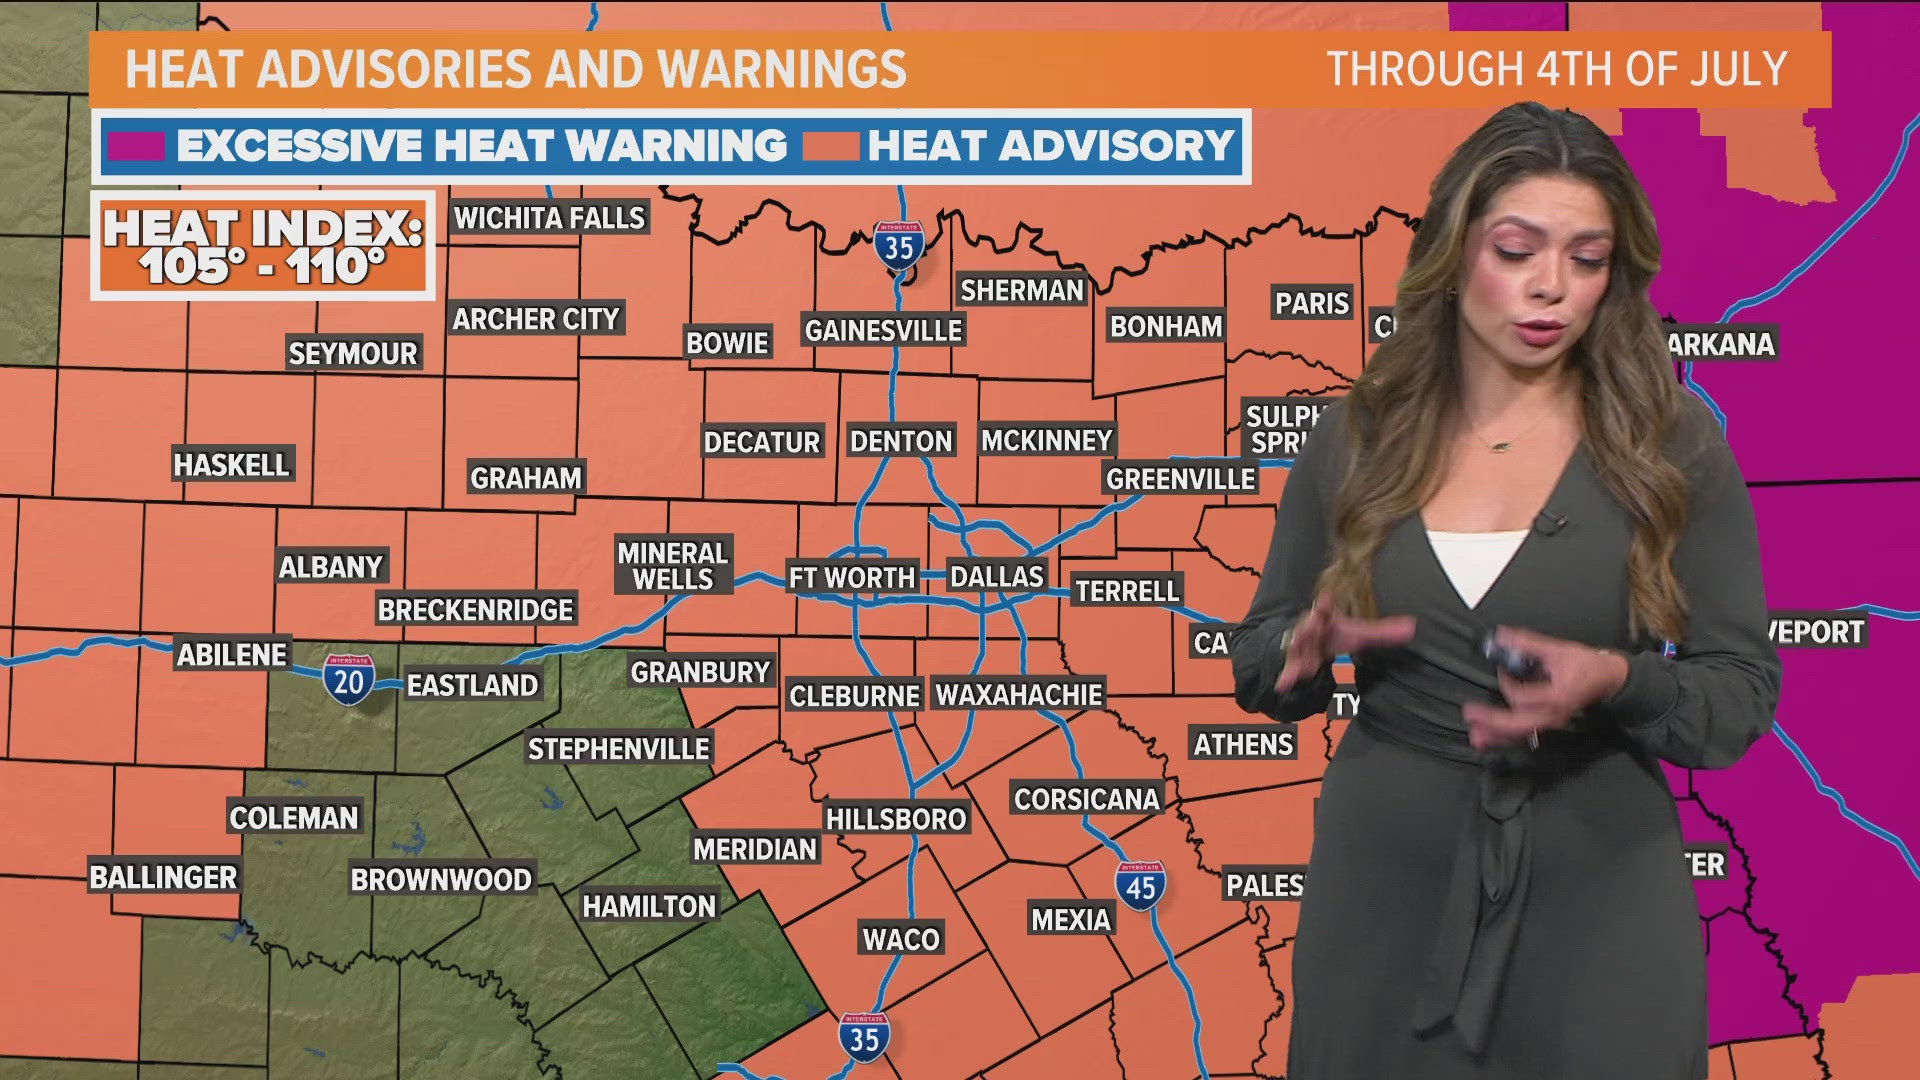 DFW Weather: Heat Alerts continue in North Texas this week, but relief is on the way late week into this weekend